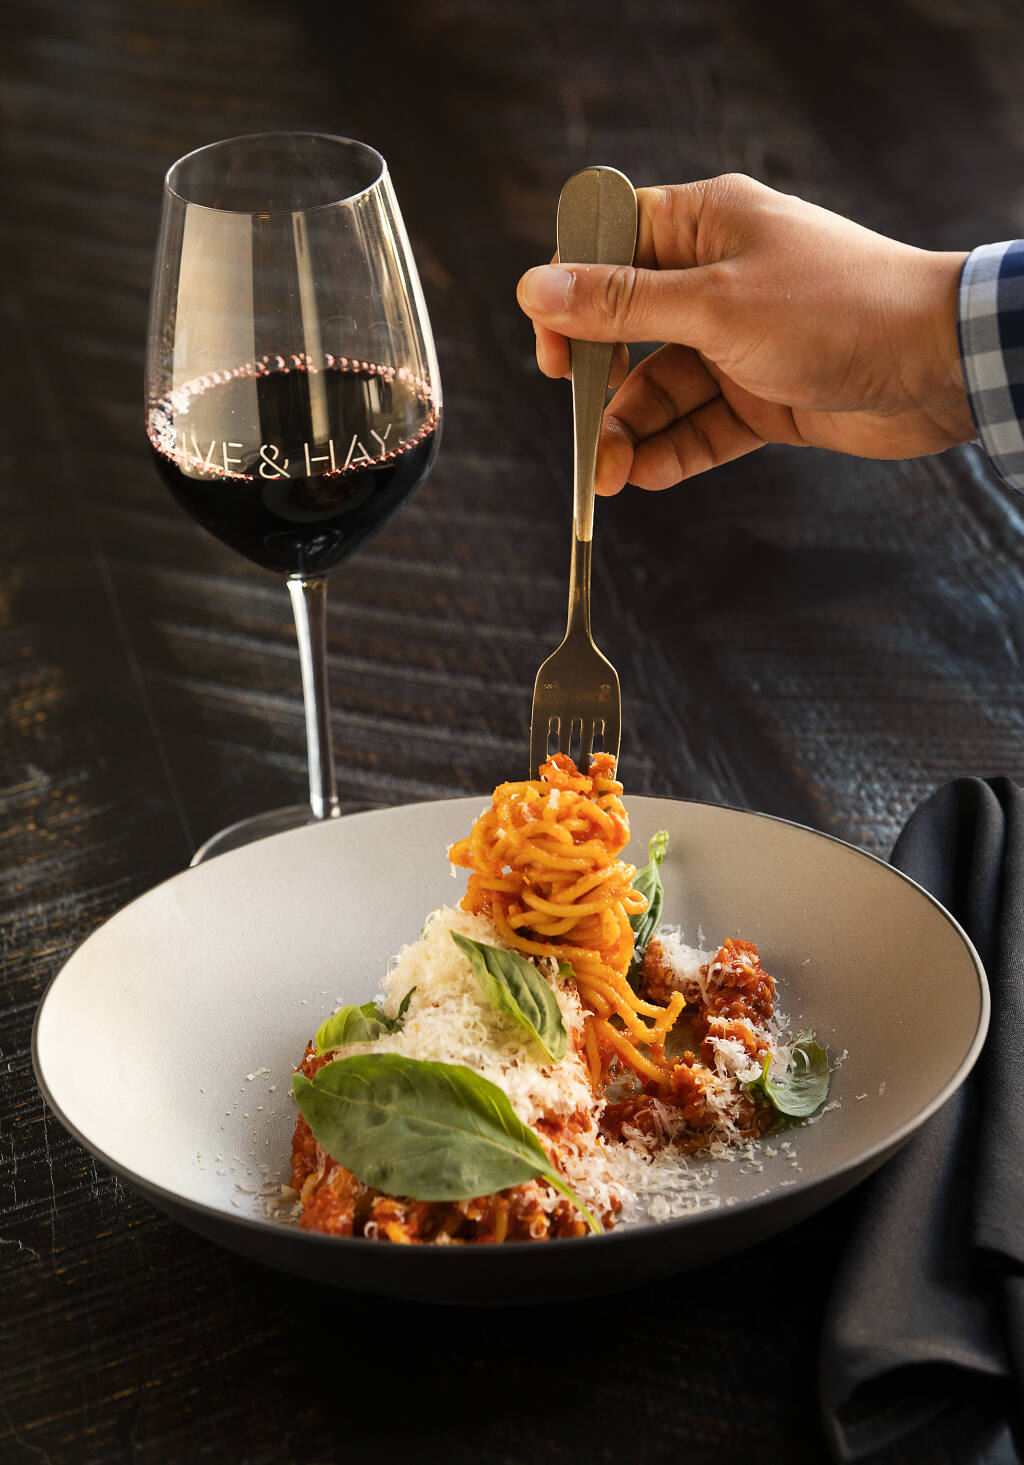 Spaghetti with house made calabrese sausage,tomato conserva and mozzarella from Olive & Hay in the Meritage Resort and Spa in Napa. (John Burgess/The Press Democrat)